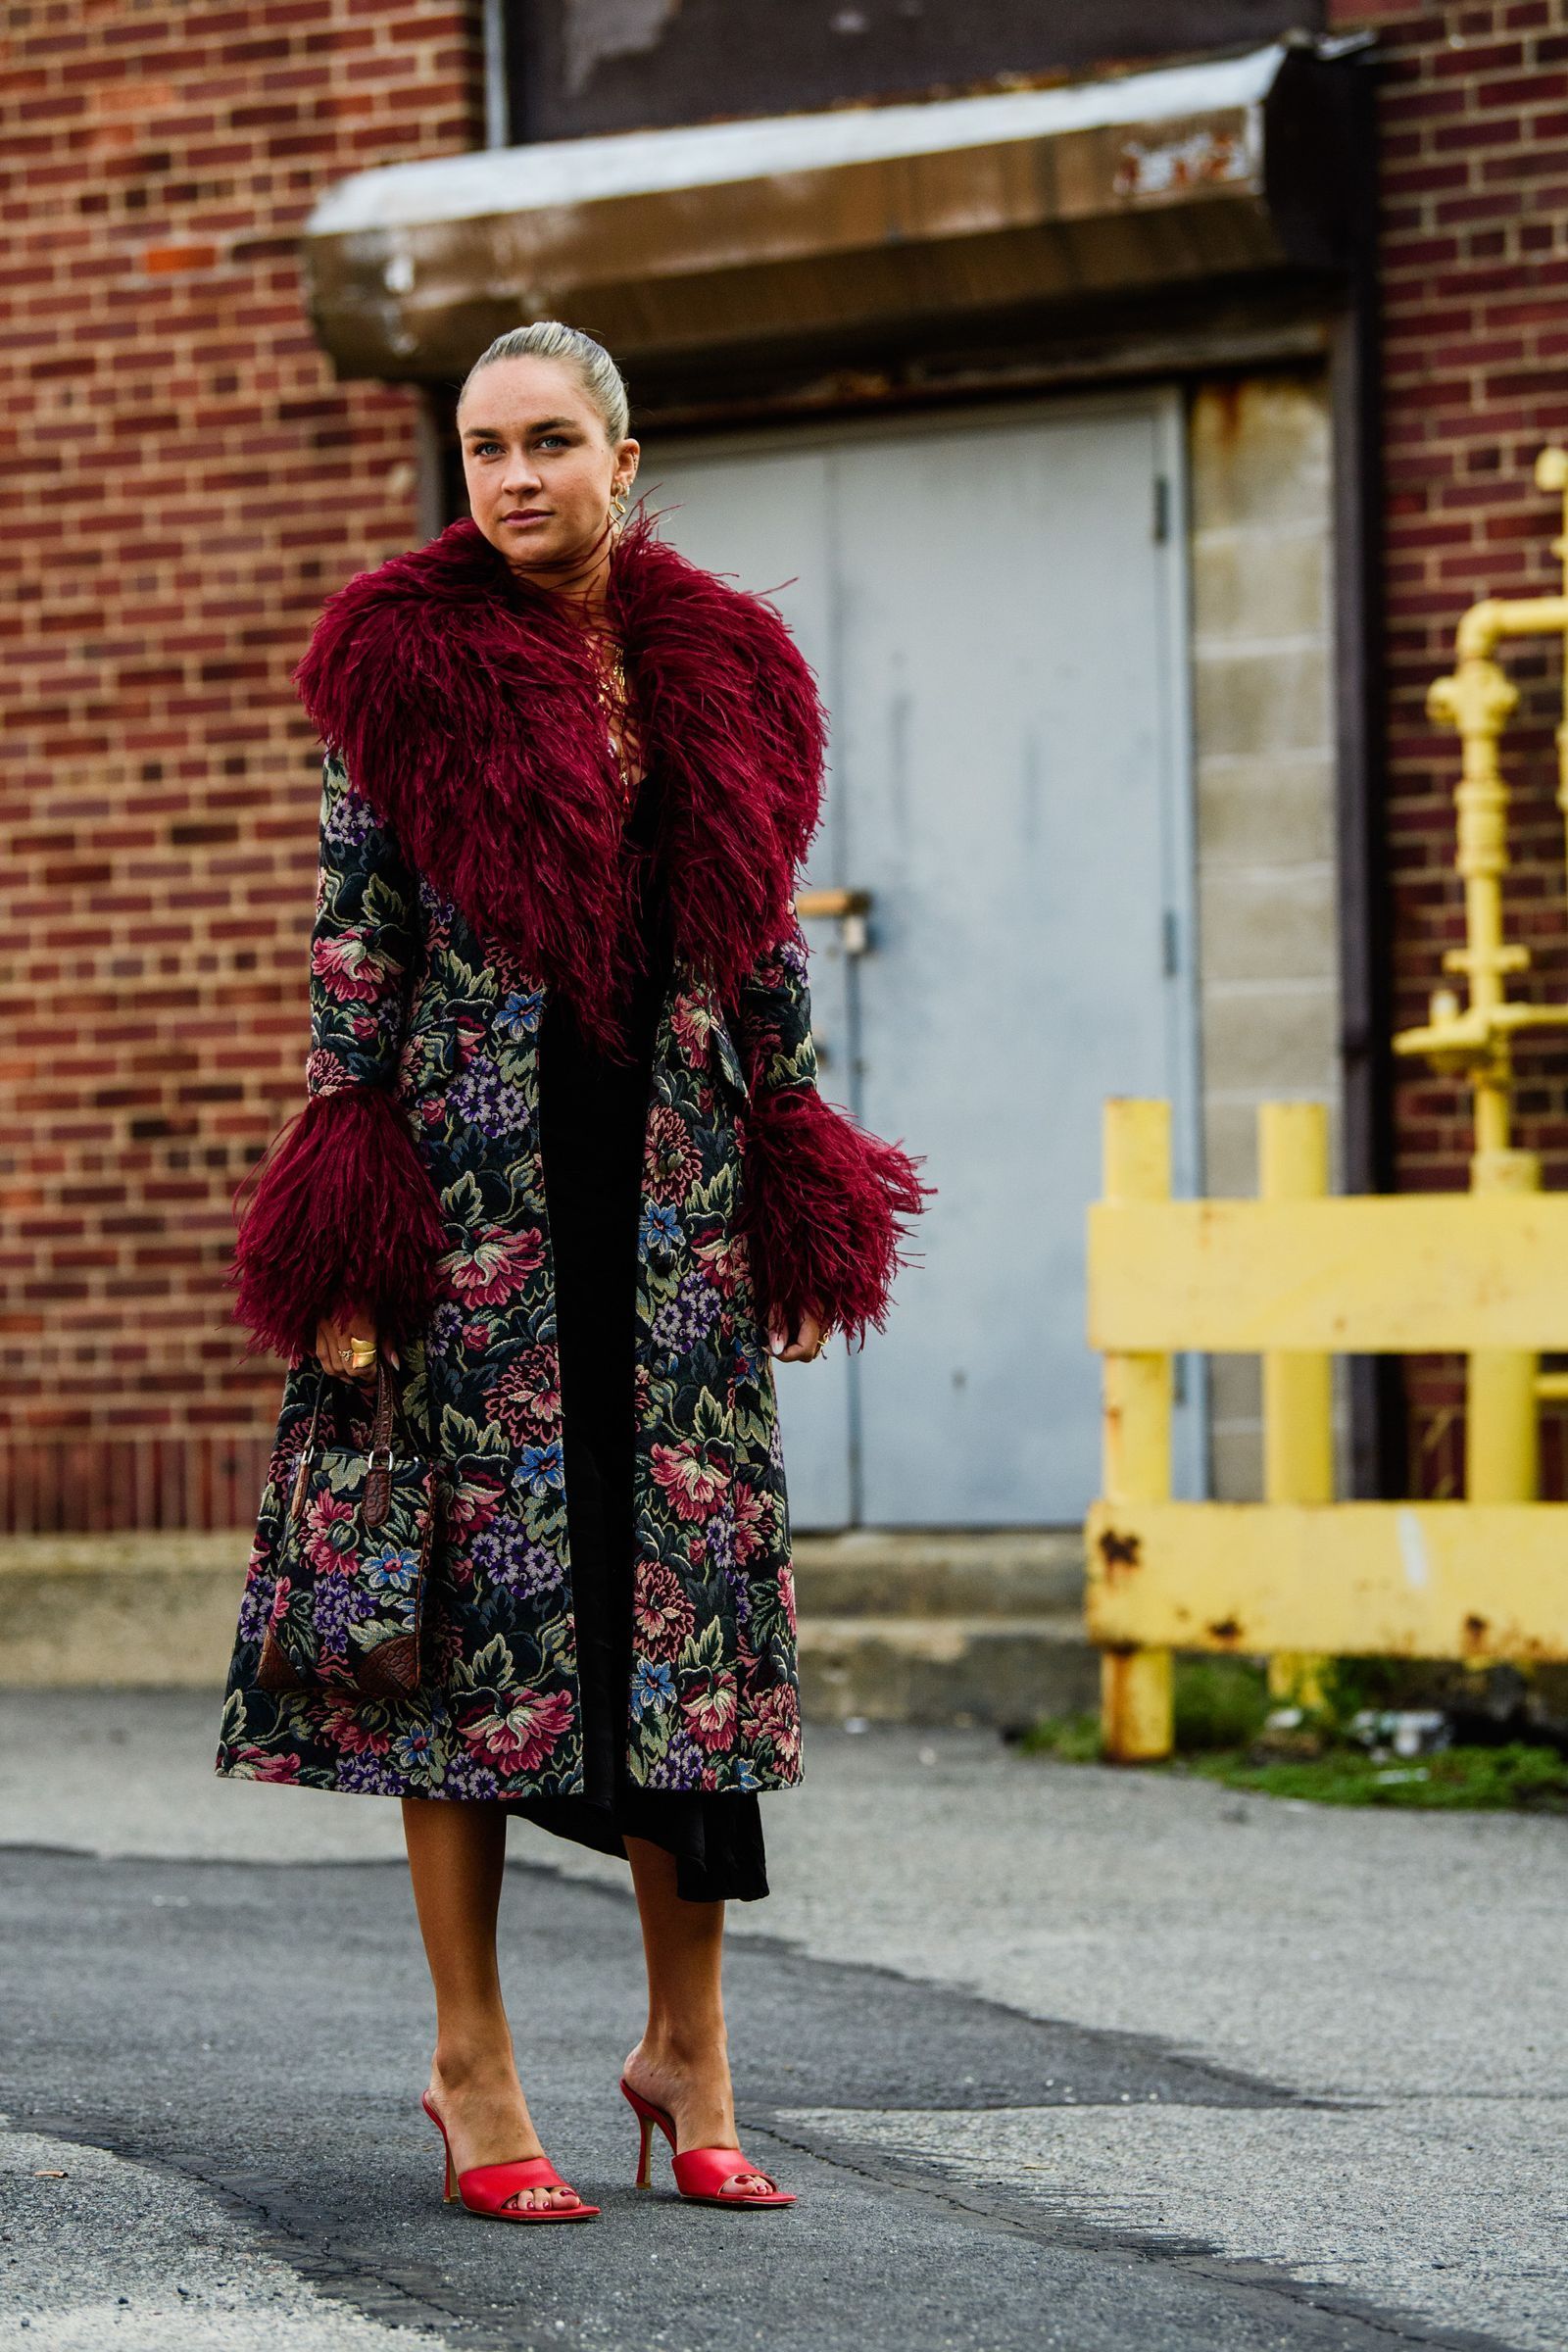 Every Must-See Street Style Outfit From New York Fashion Week - Every Must-See Street Style Outfit From New York Fashion Week -   18 style Street classy ideas